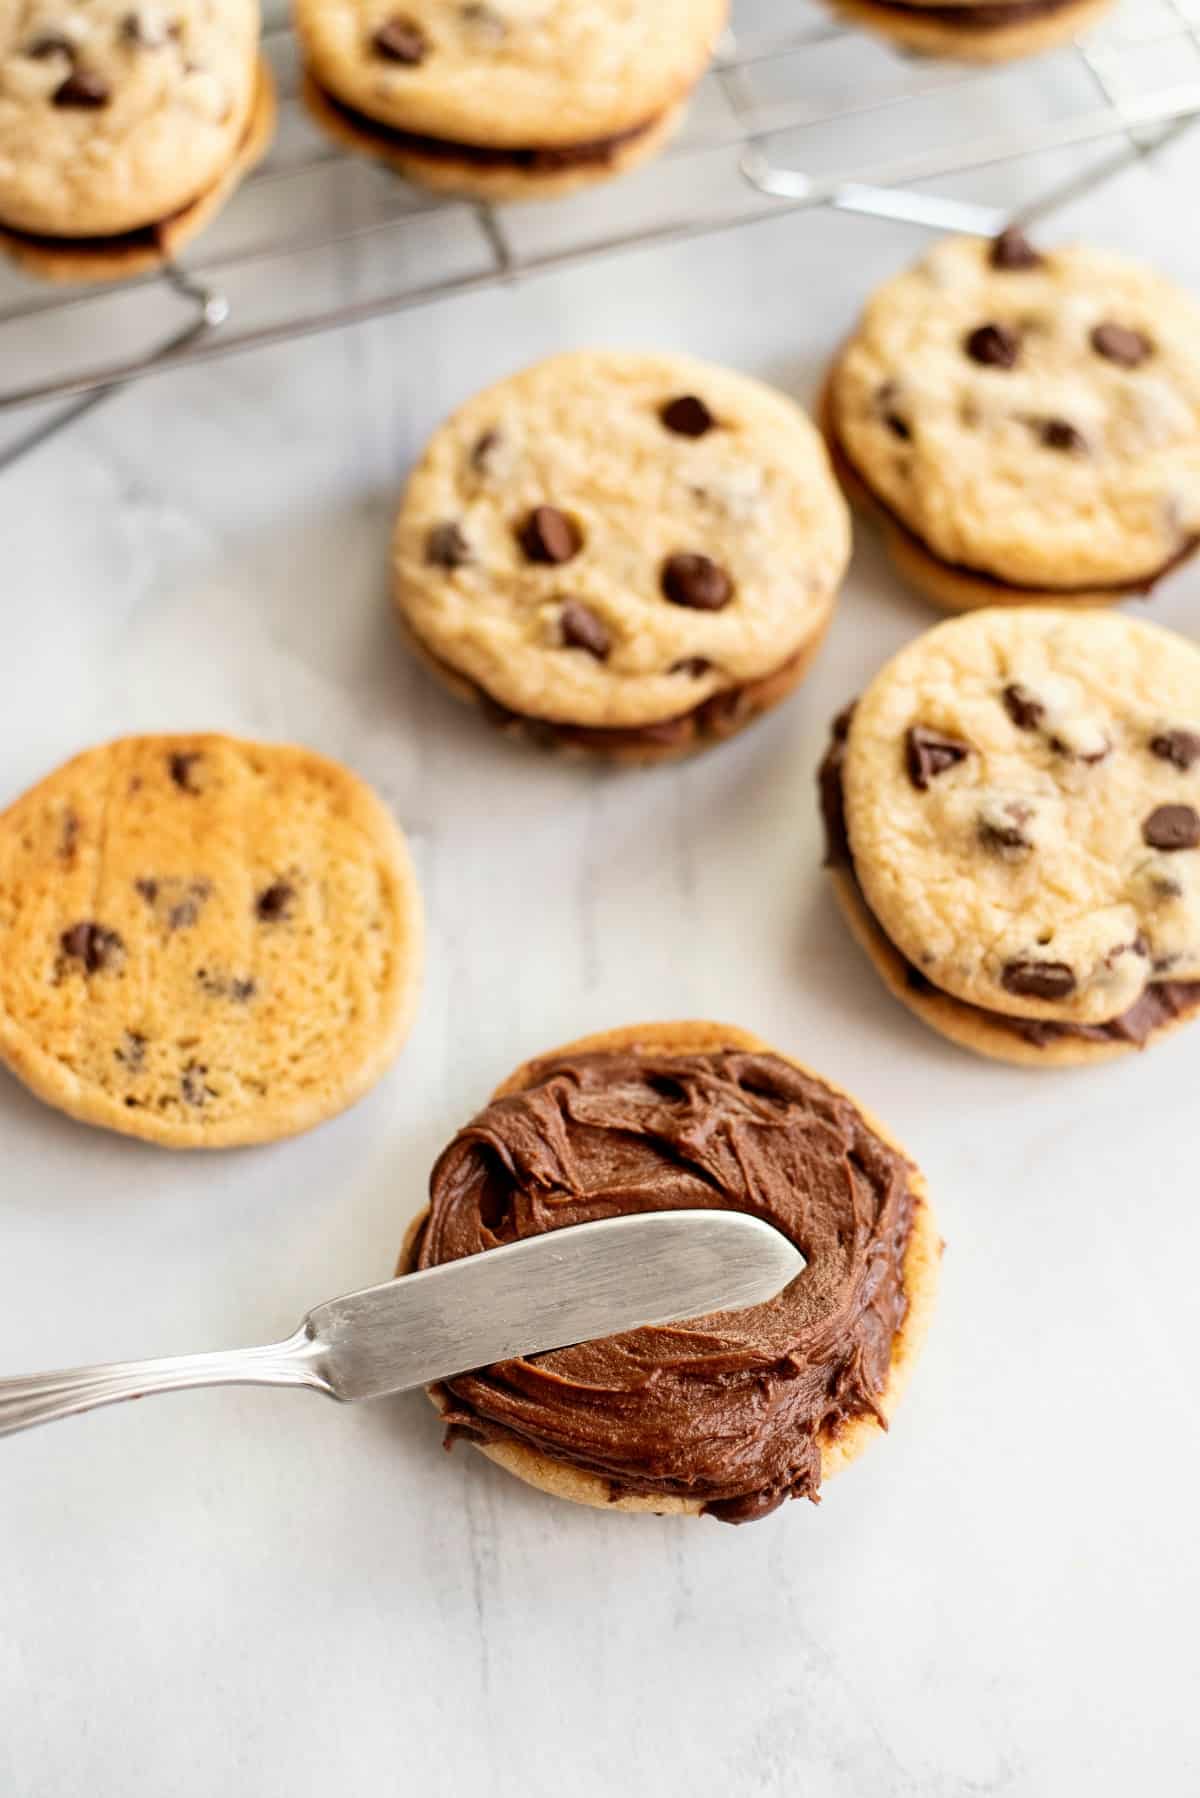 Chocolate frosting being spread on a chocolate chip cookie.